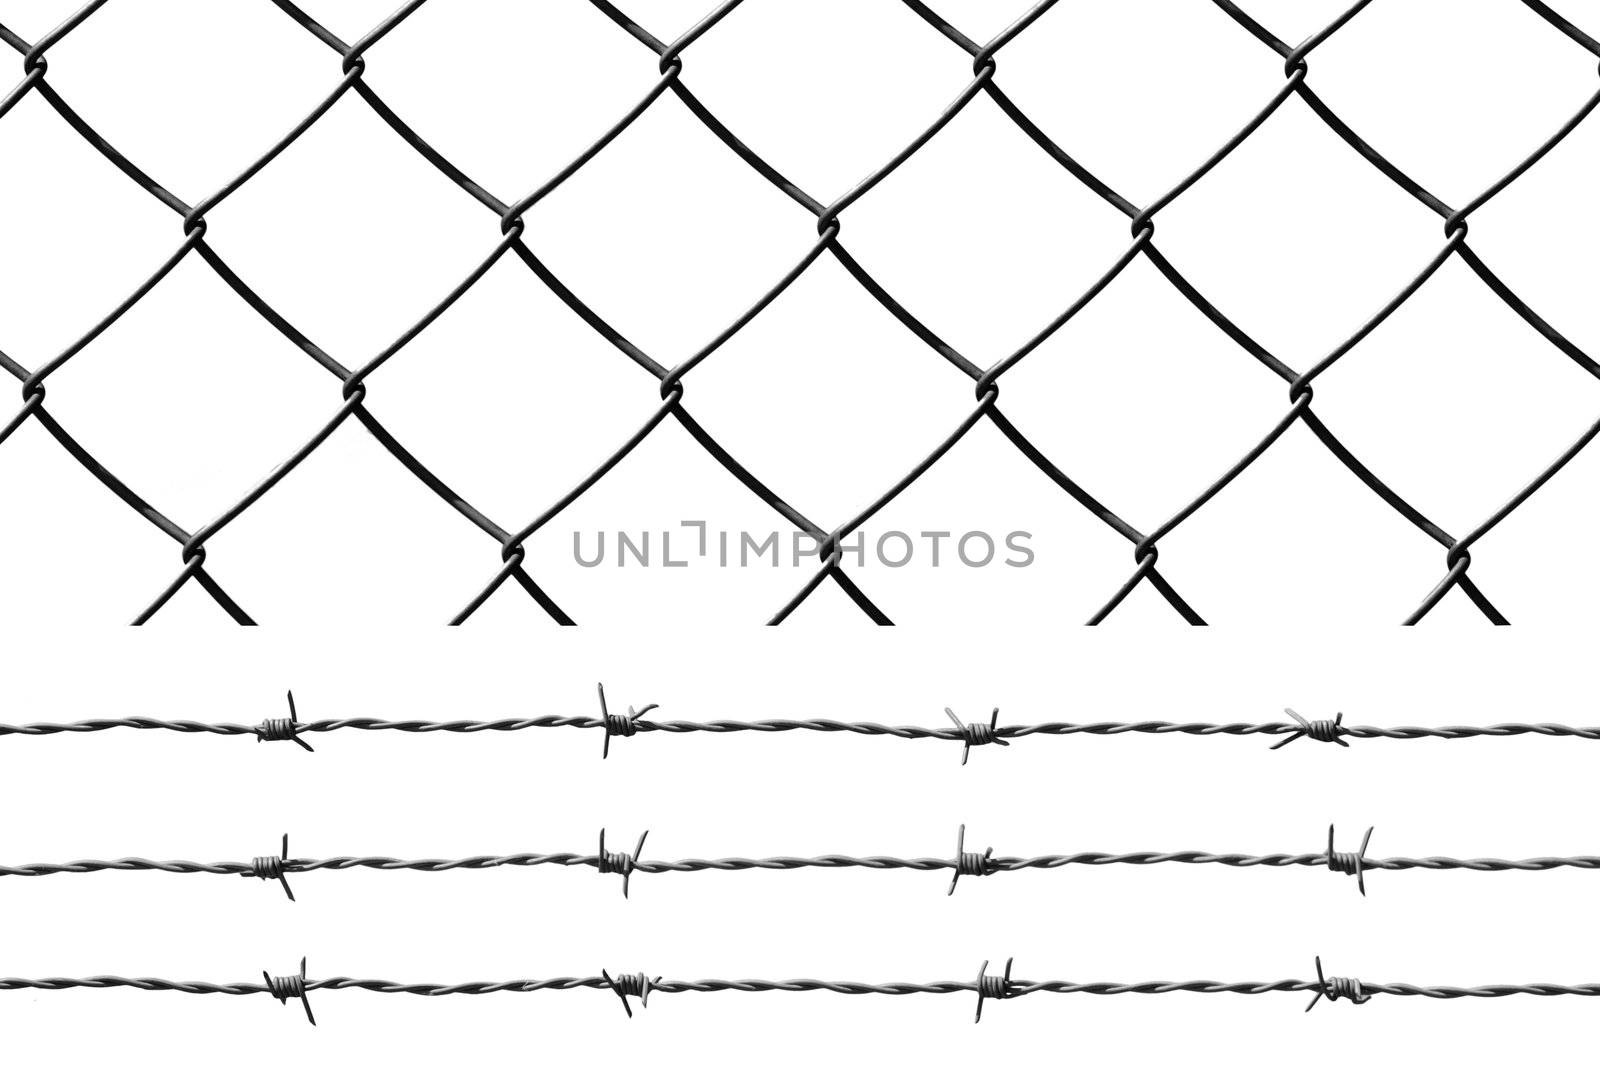 Barbed wire and wire fence isolated over white